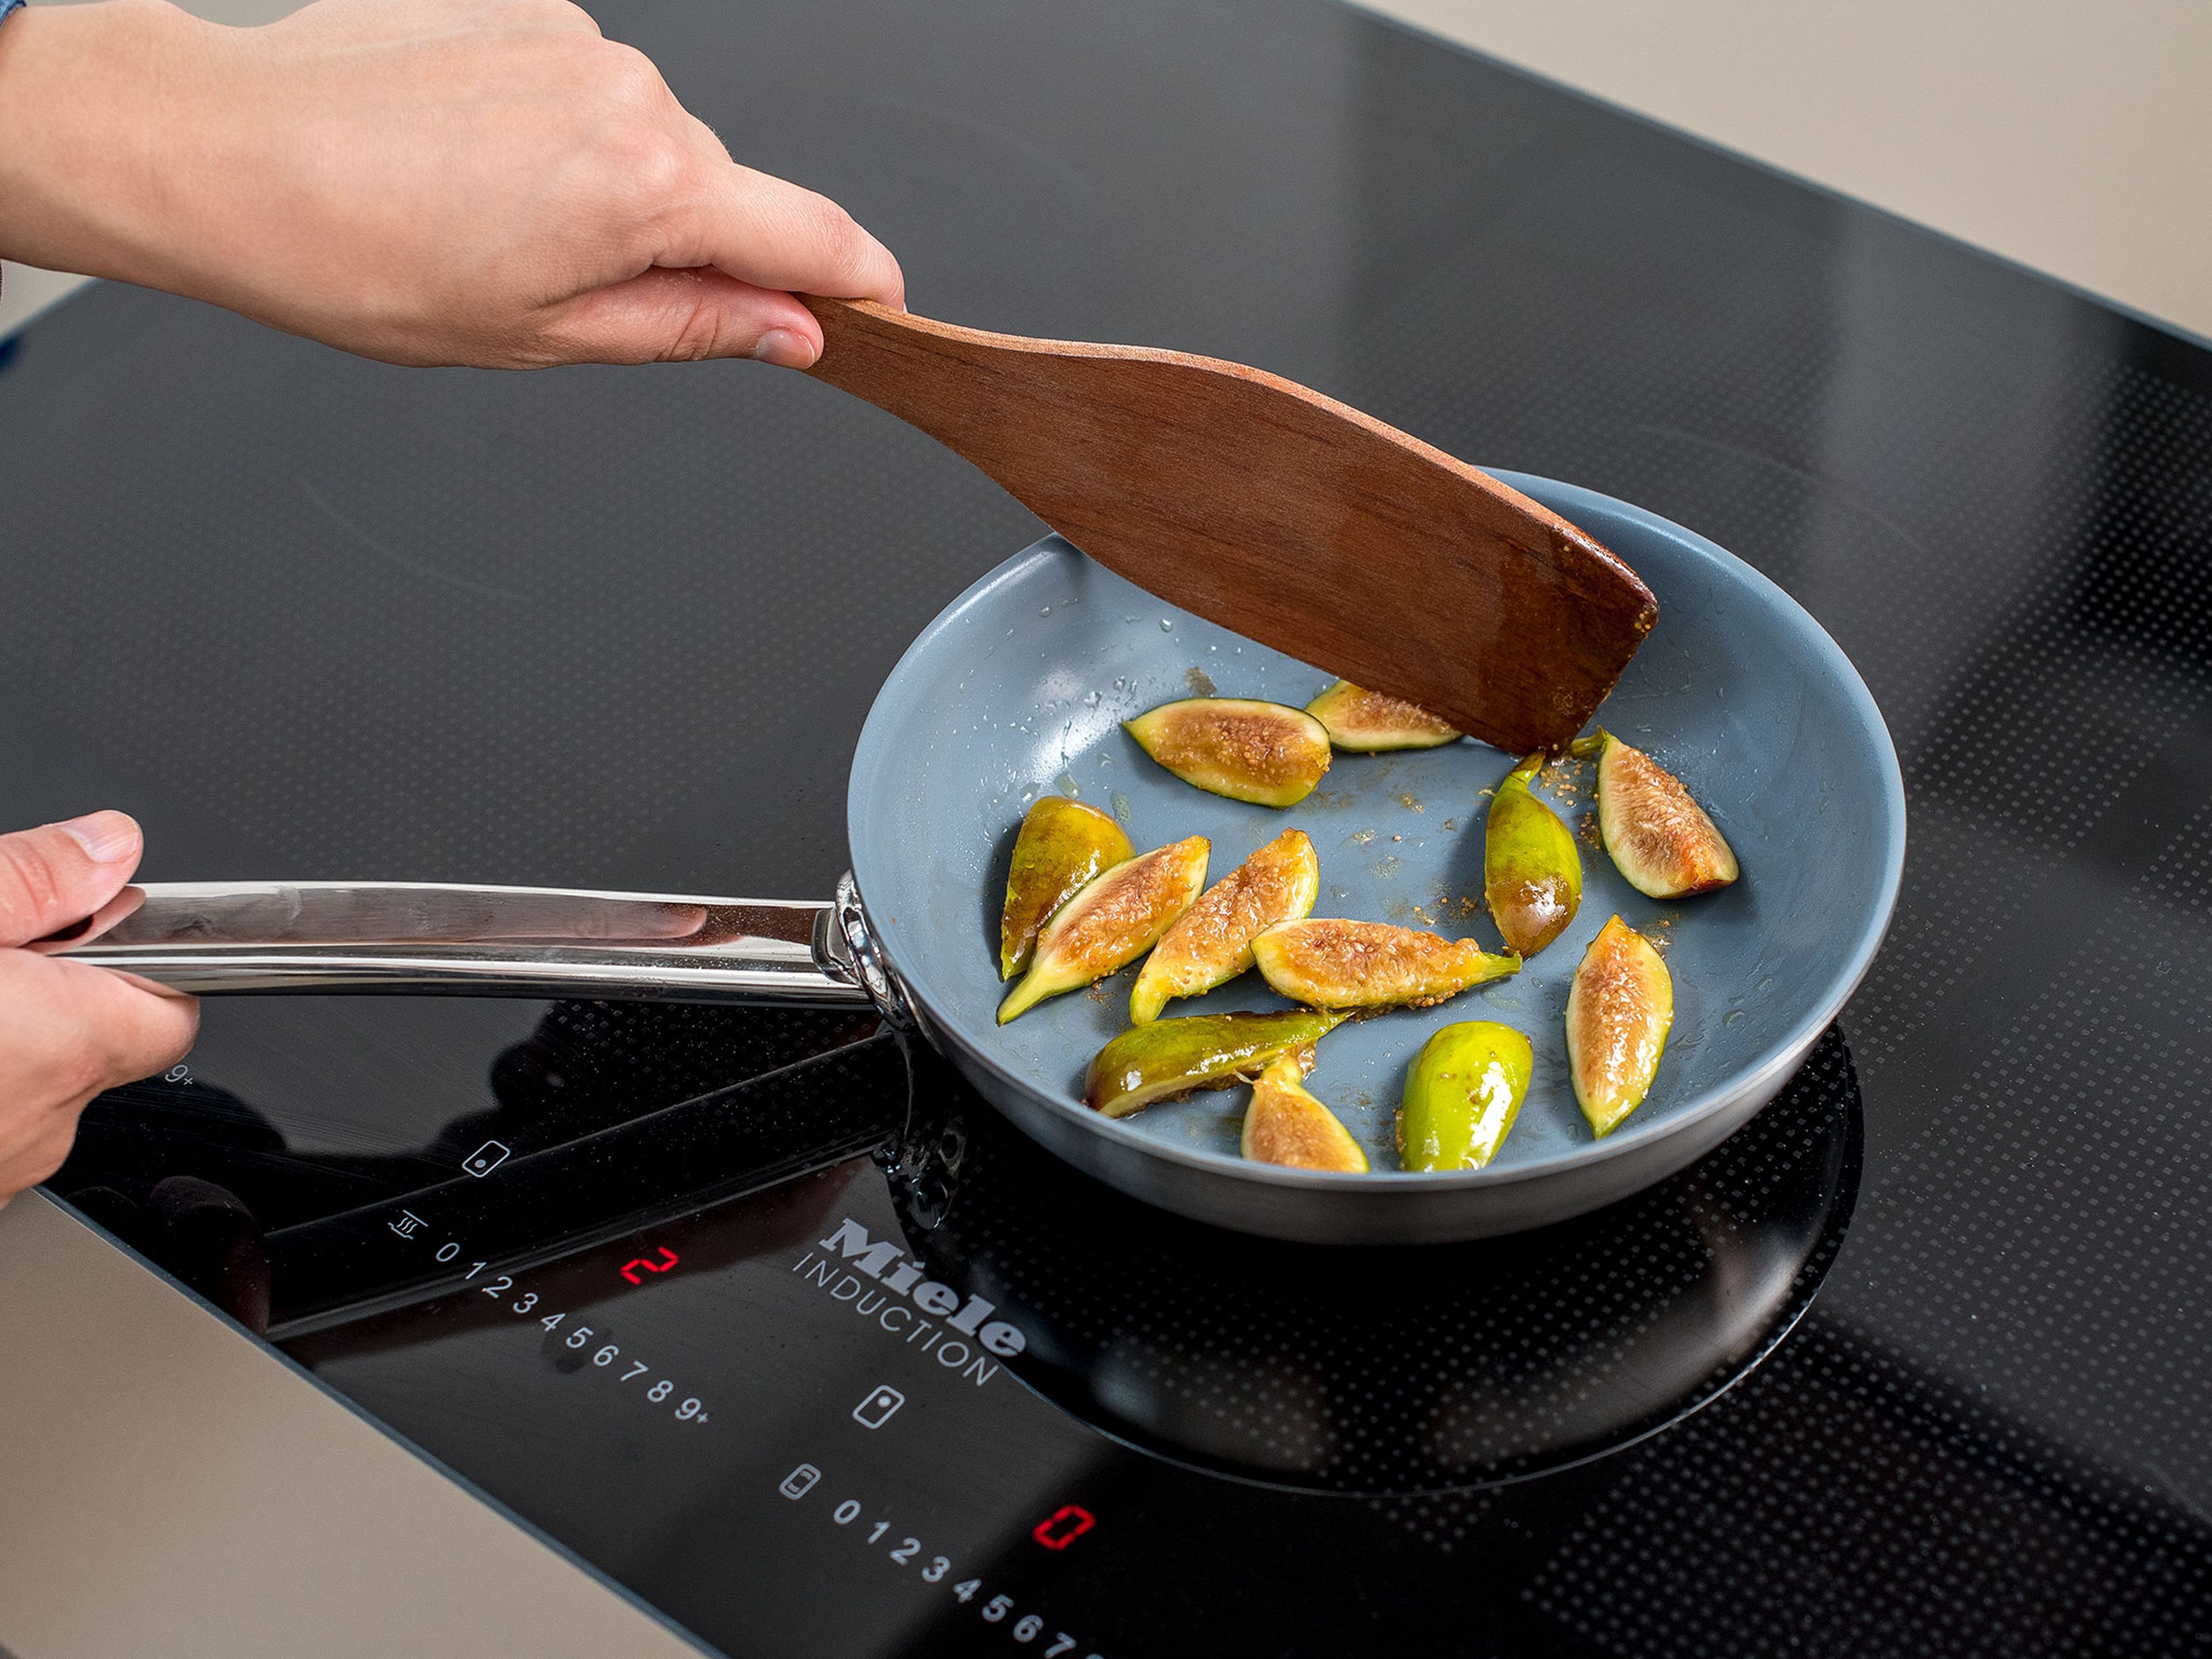 Quarter the figs. Heat oil in frying pan and fry figs for approx. 10 min., or until caramelized.